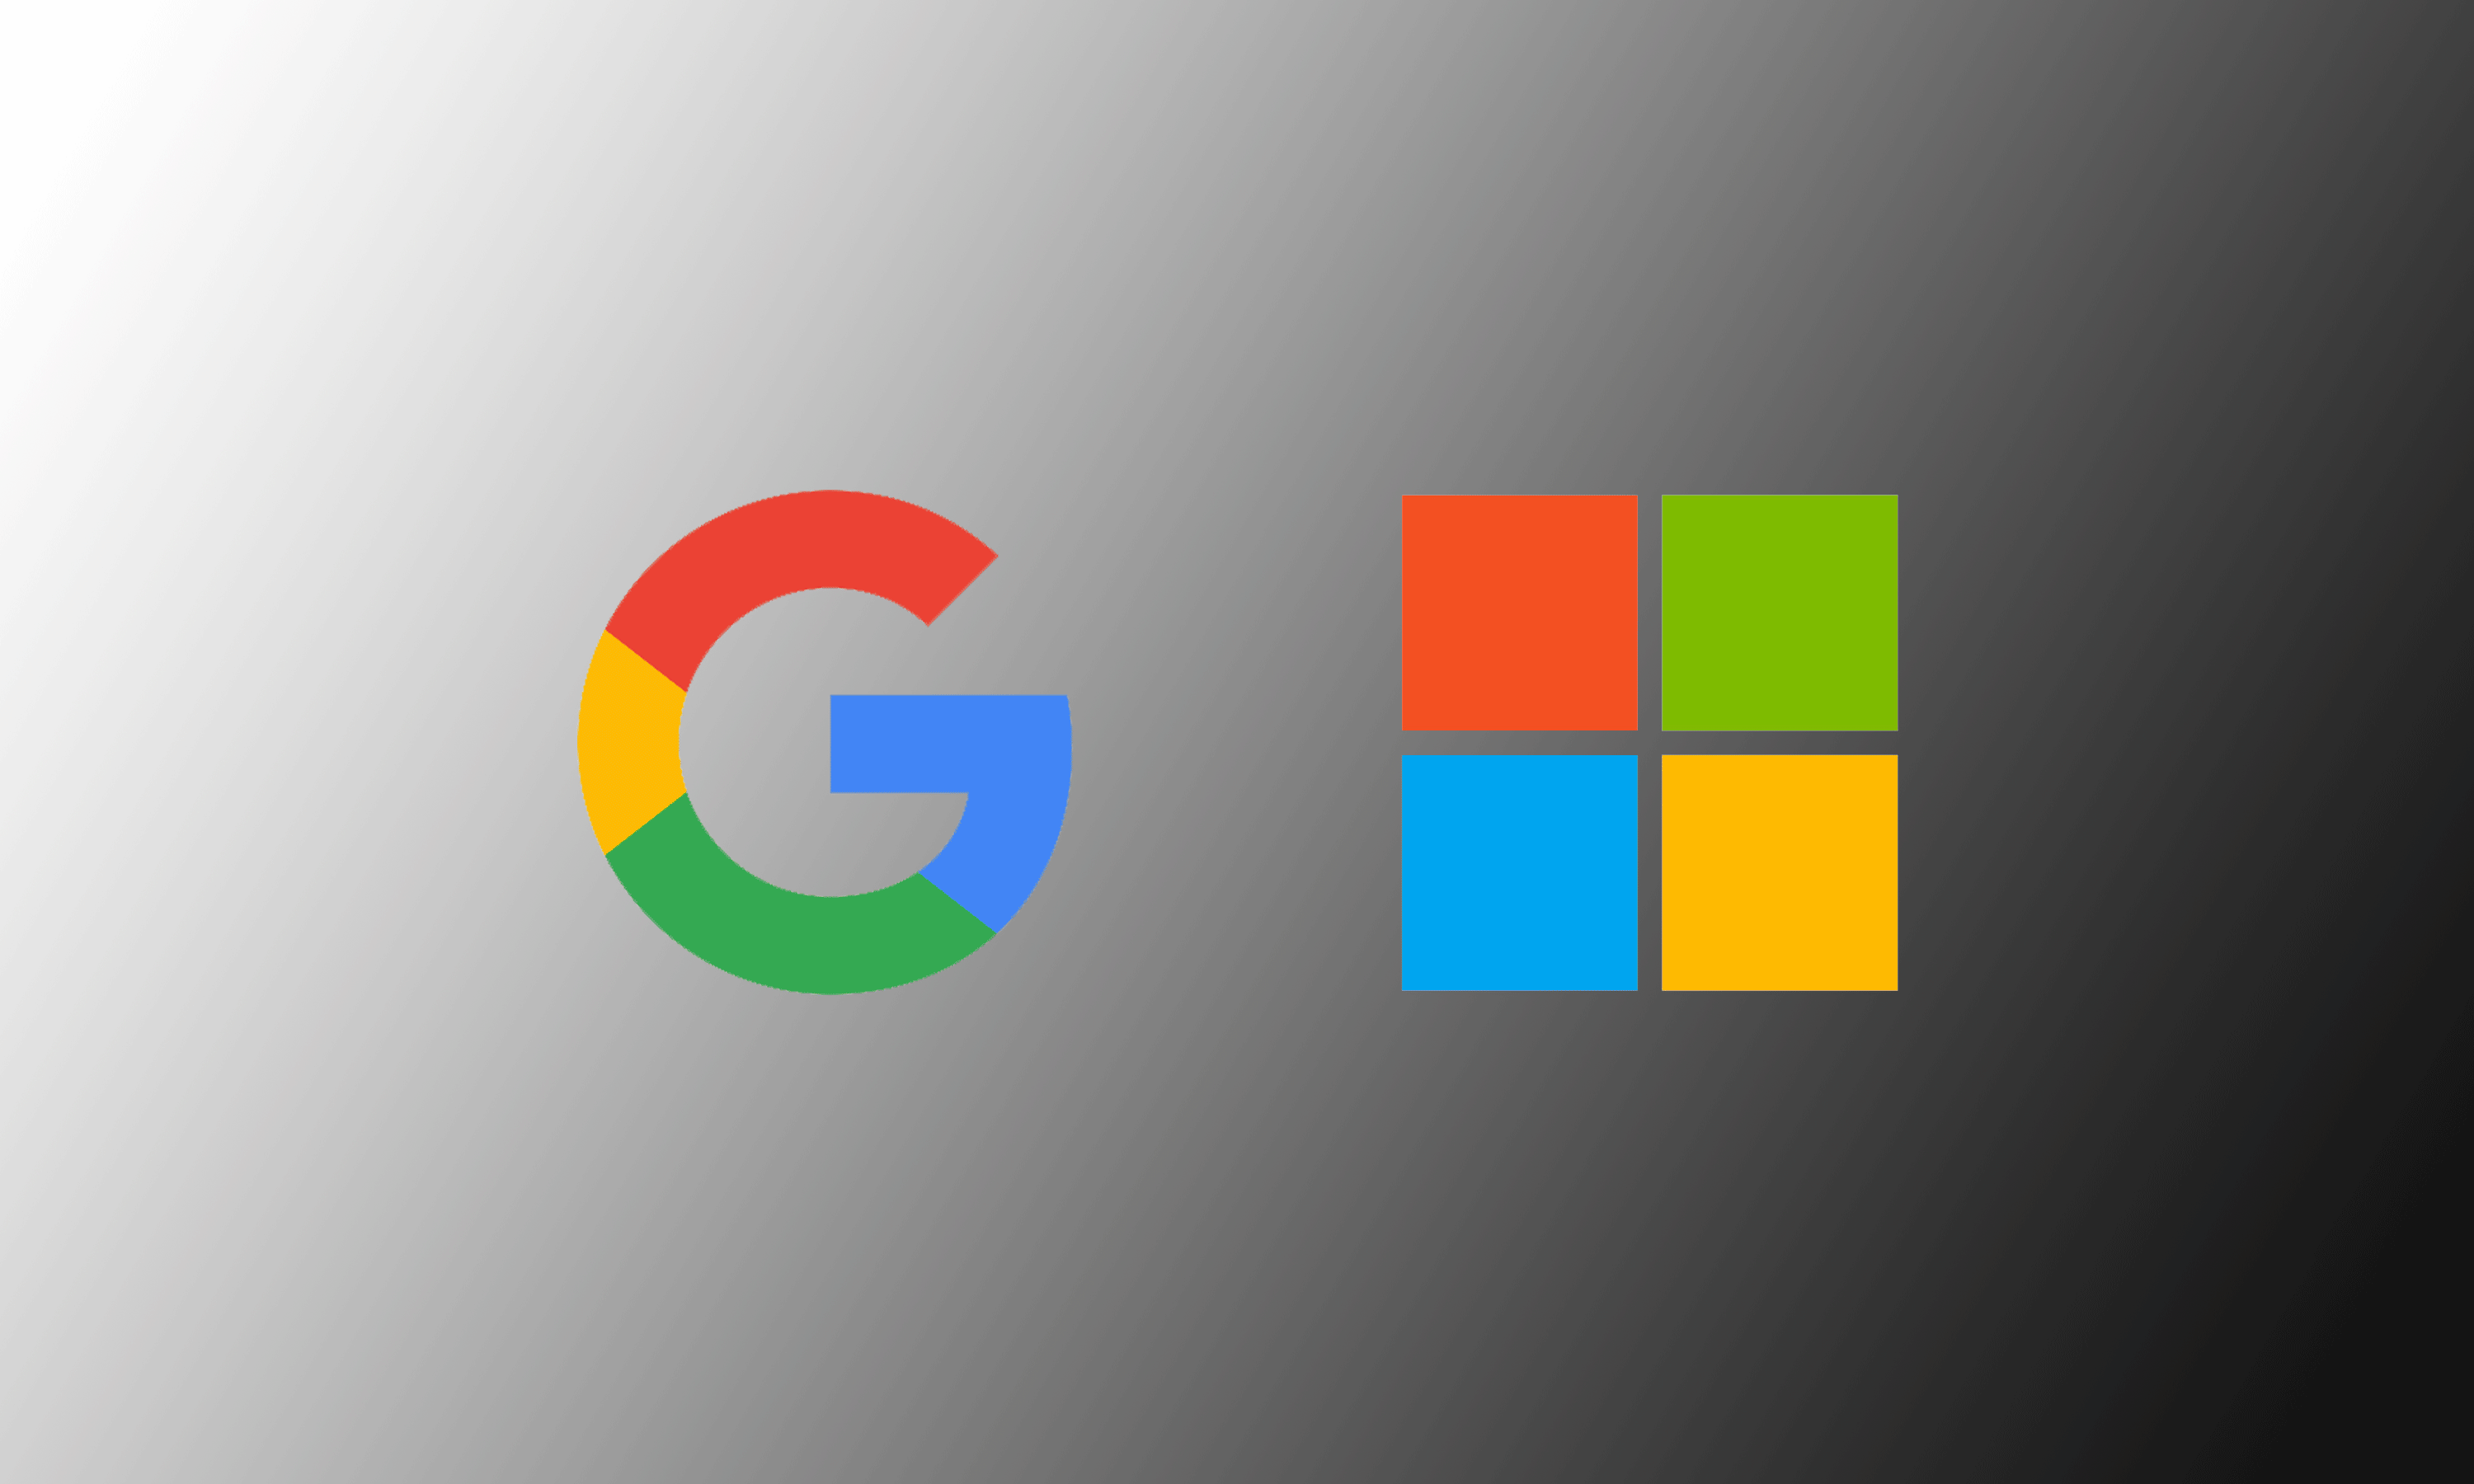 A Face-Off in Tech: Alphabet vs. Microsoft - What to Expect by 2030